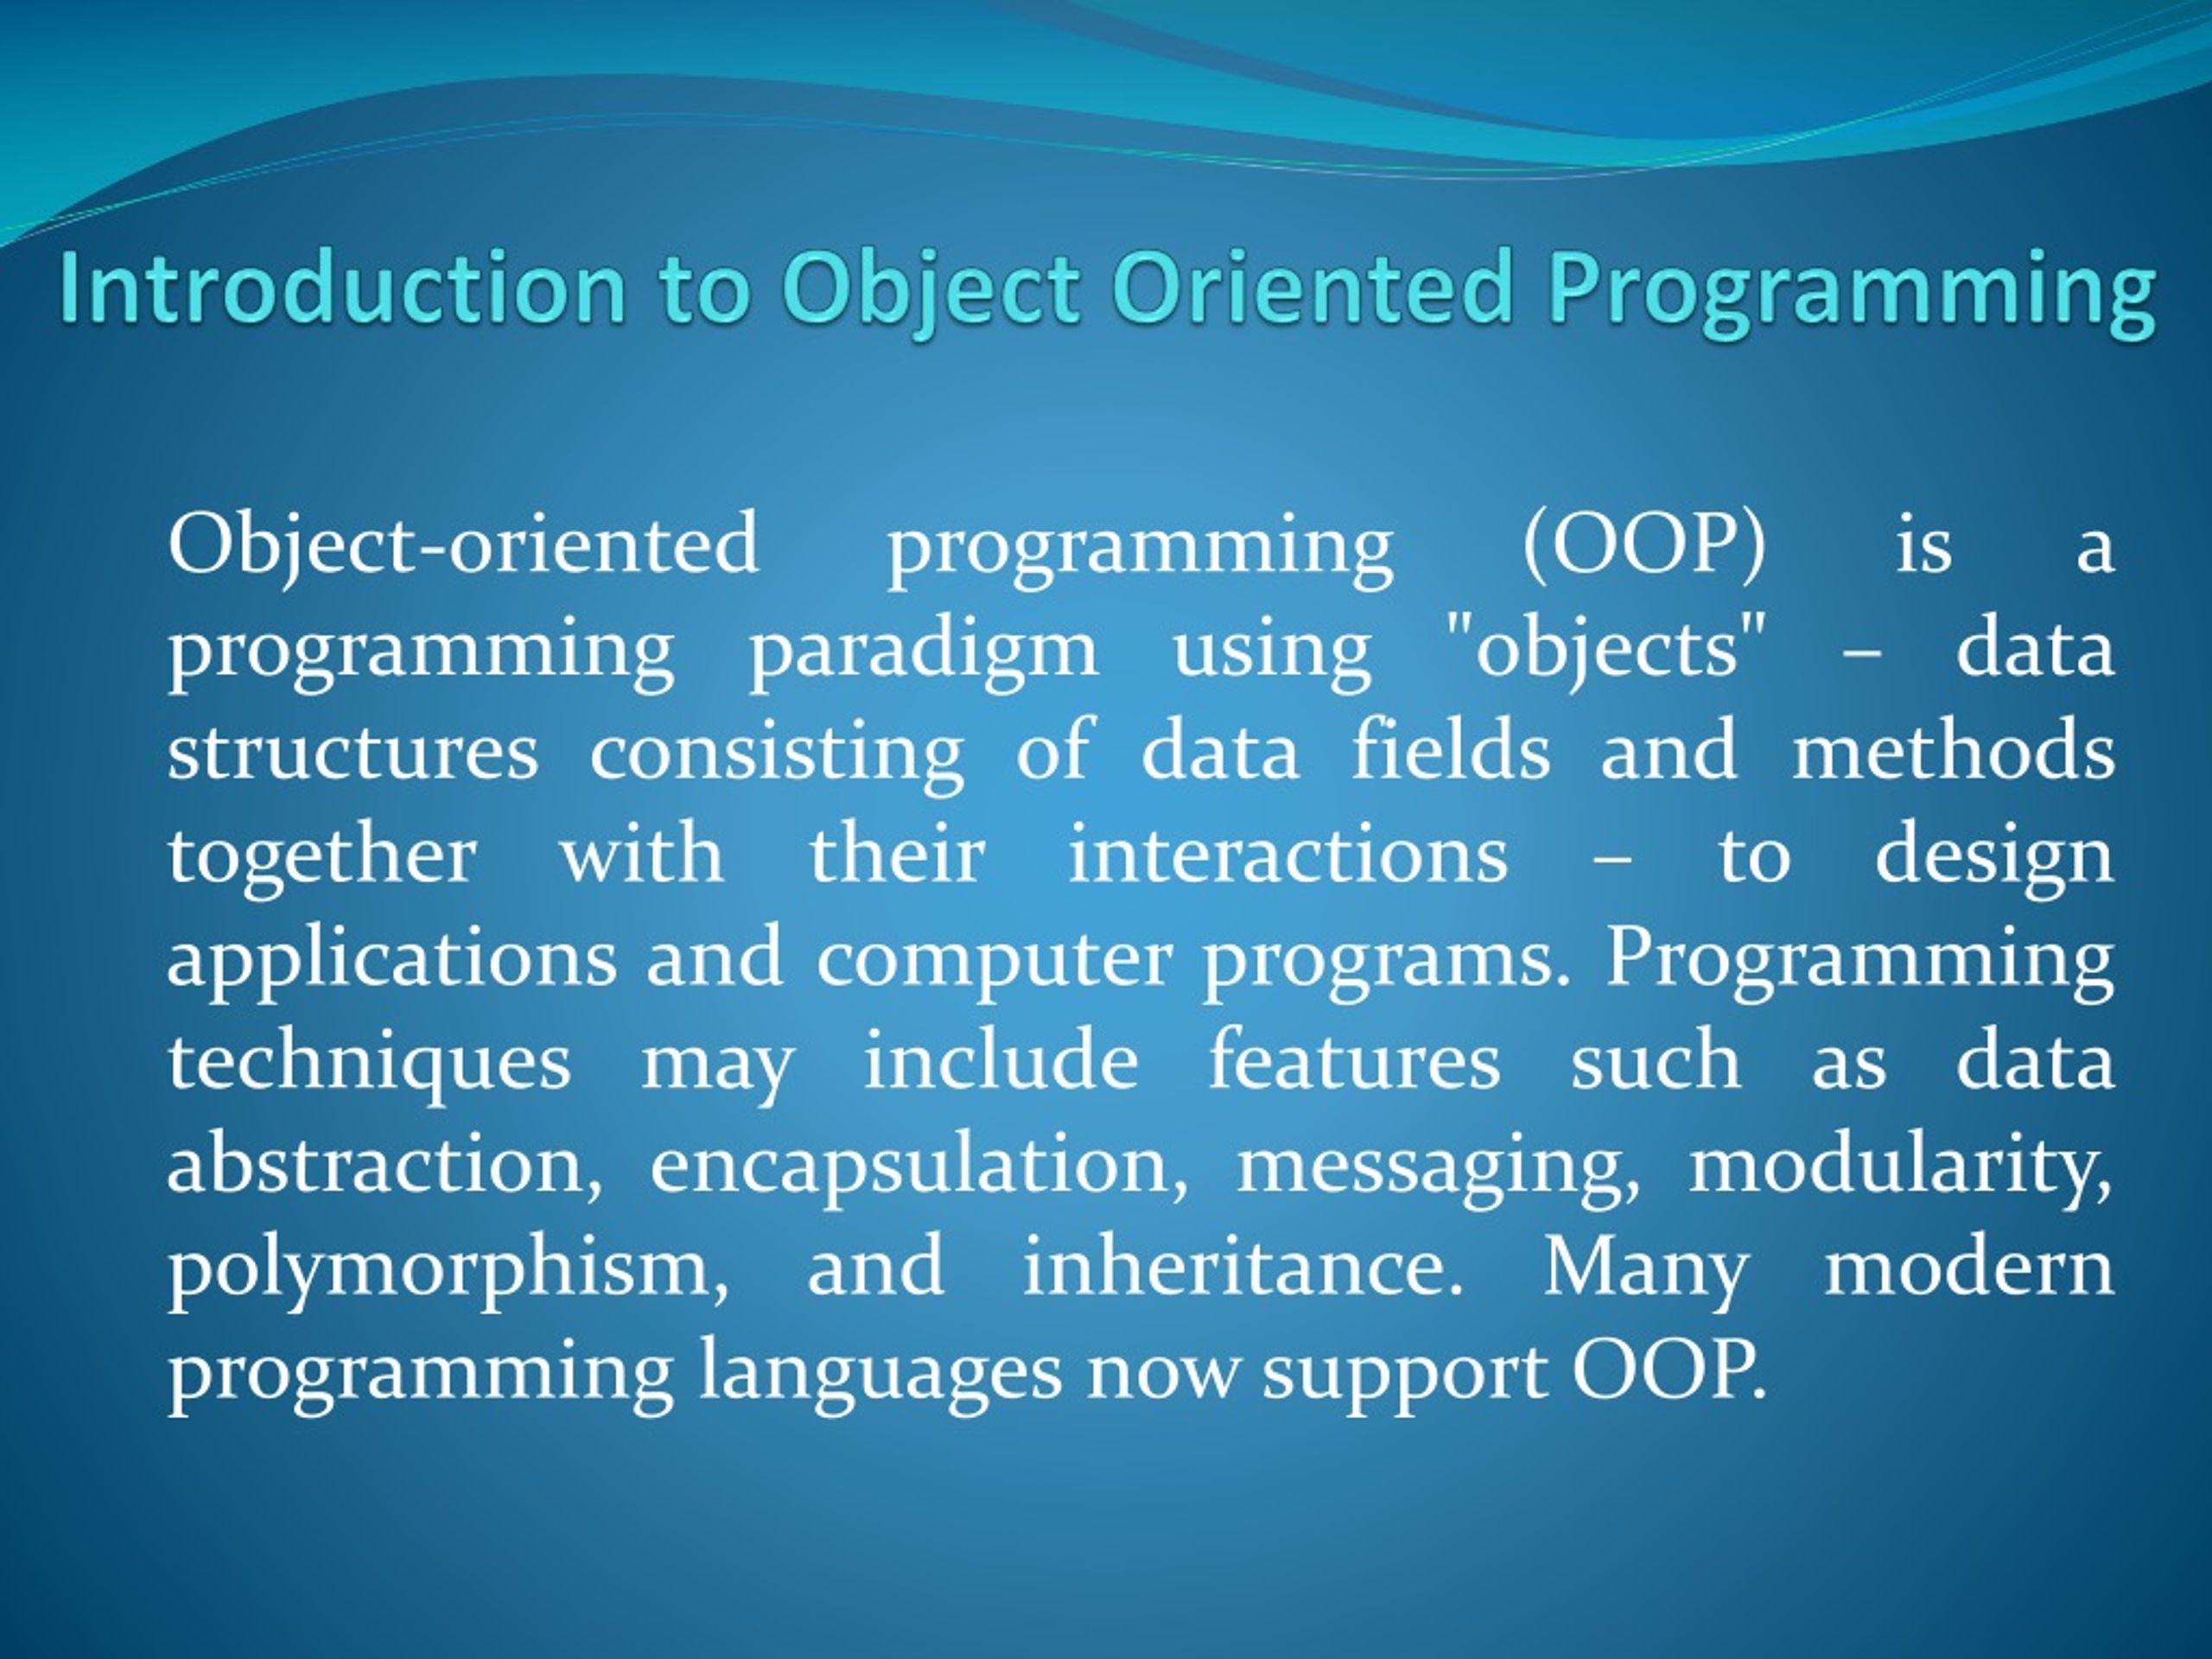 Ppt Introduction To Object Oriented Programming Powerpoint Presentation Id577631 6030